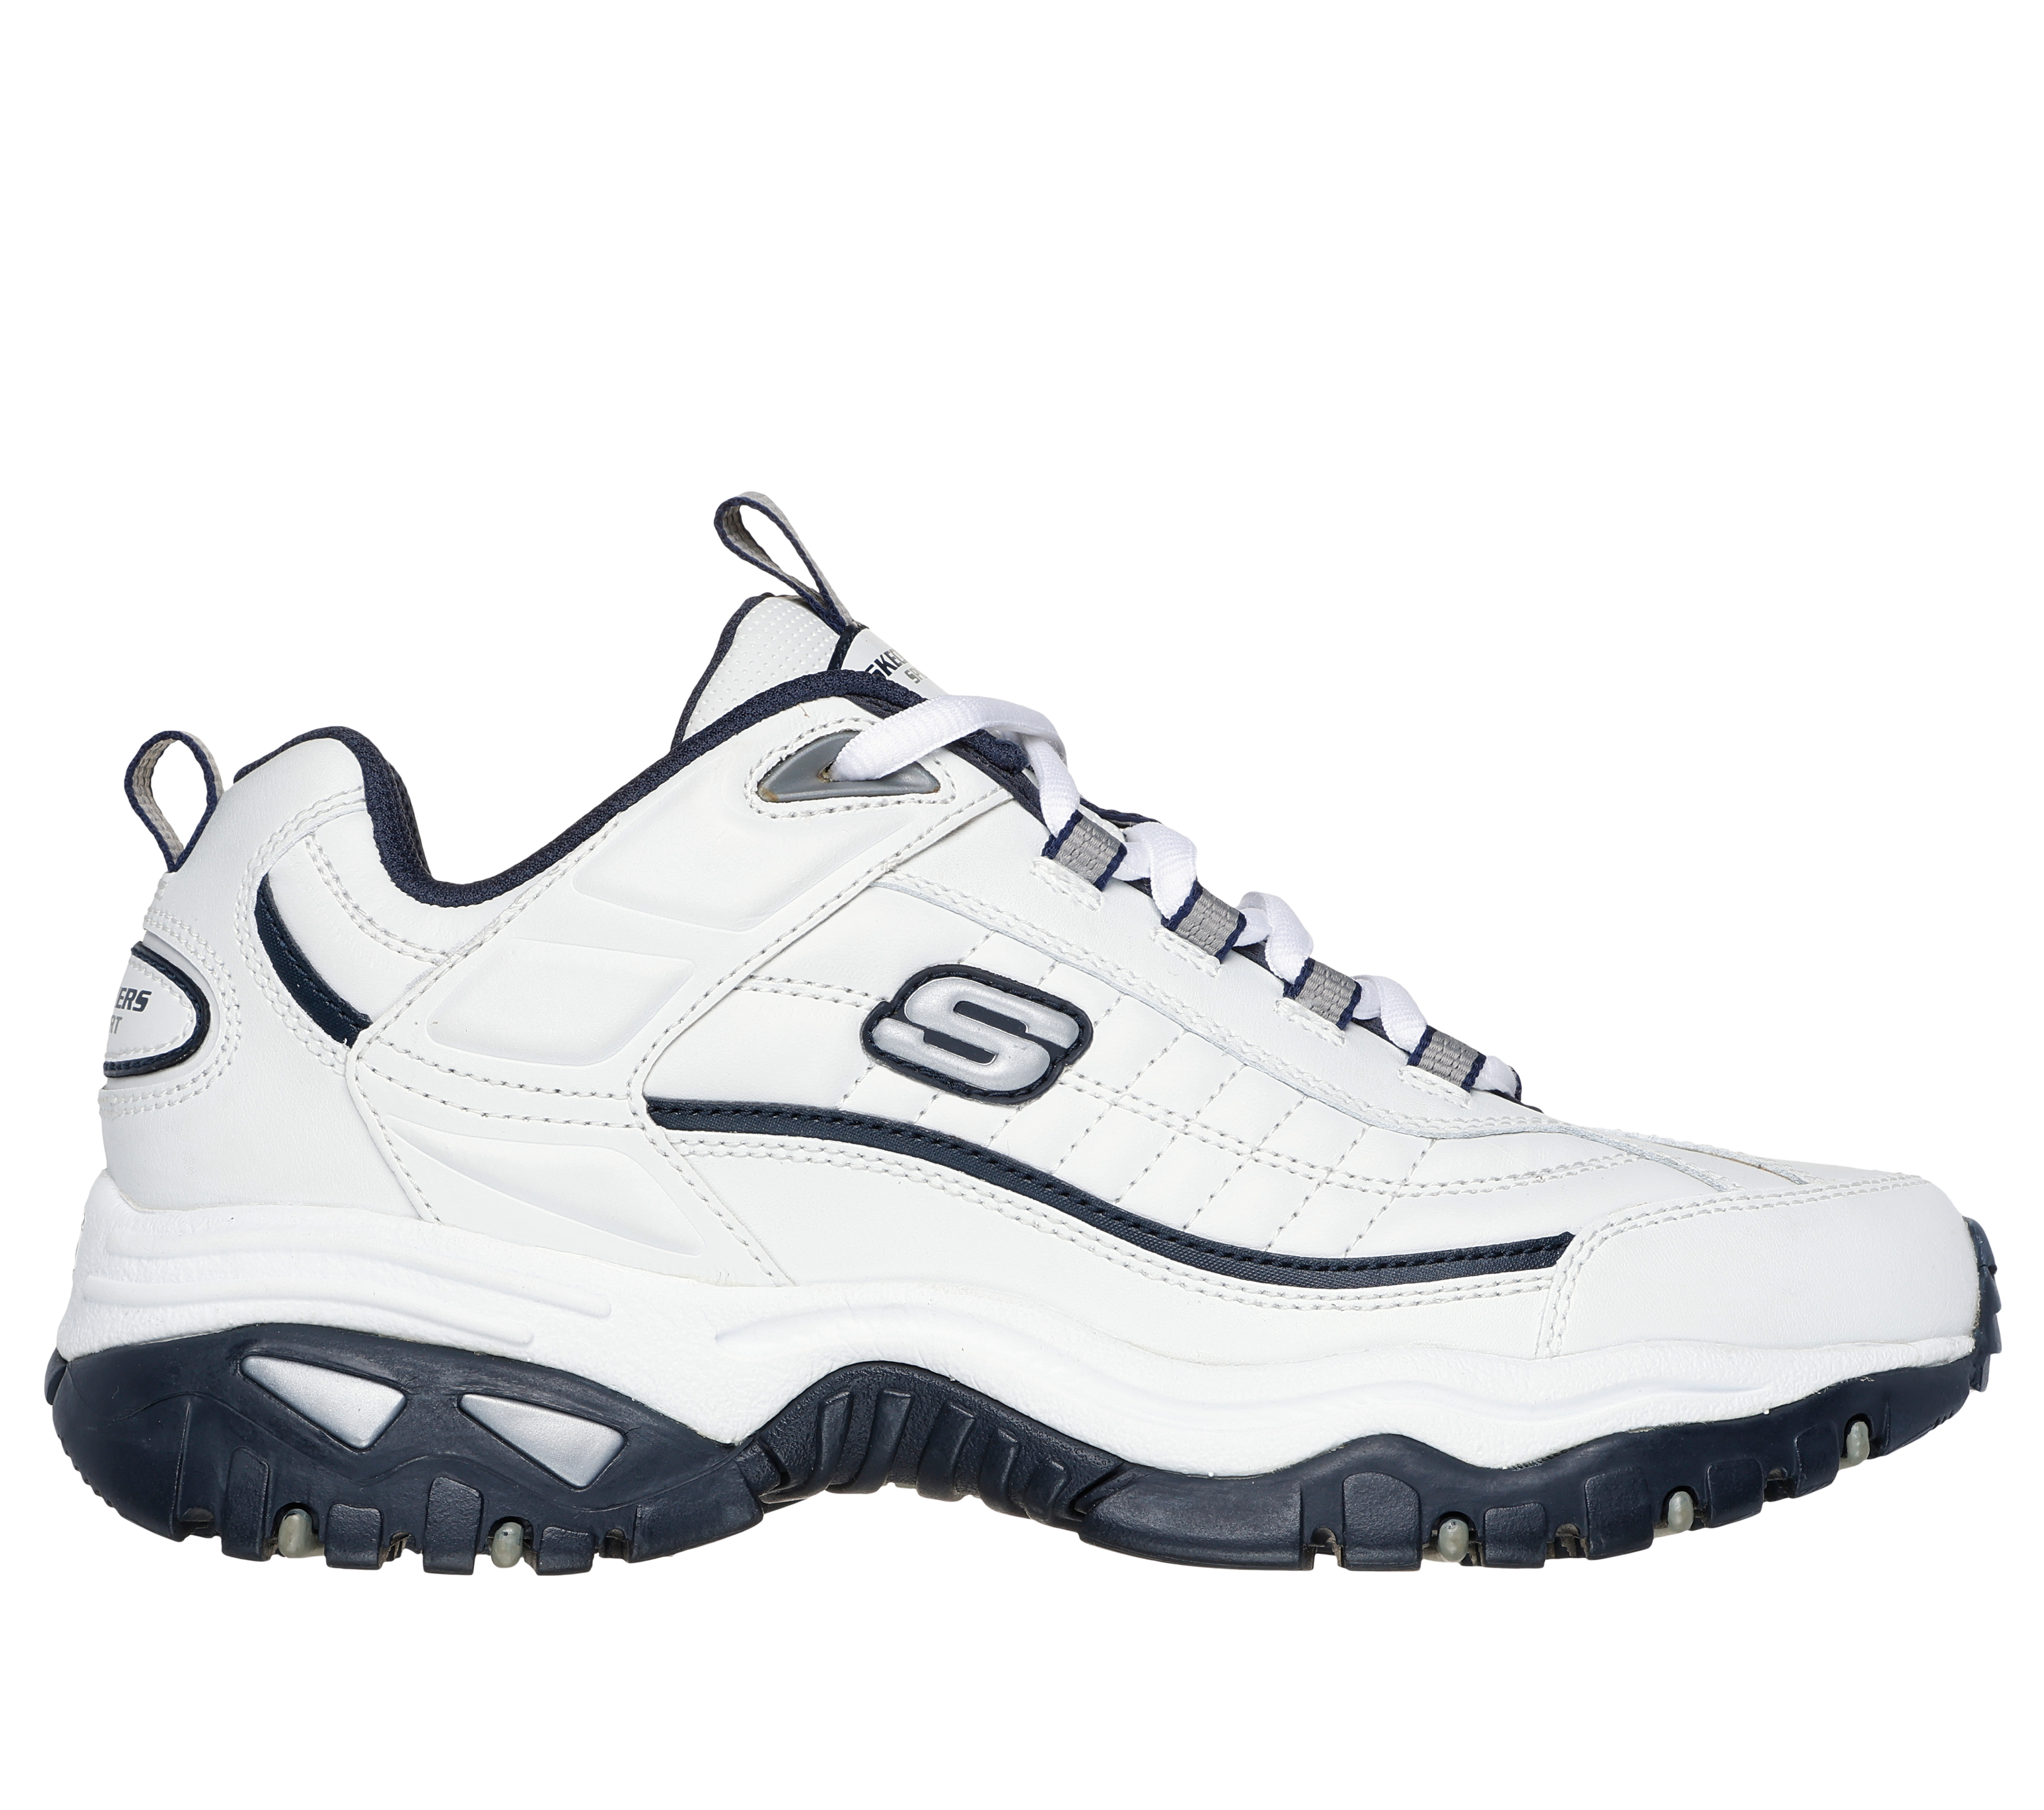 gym shoes on sale skechers